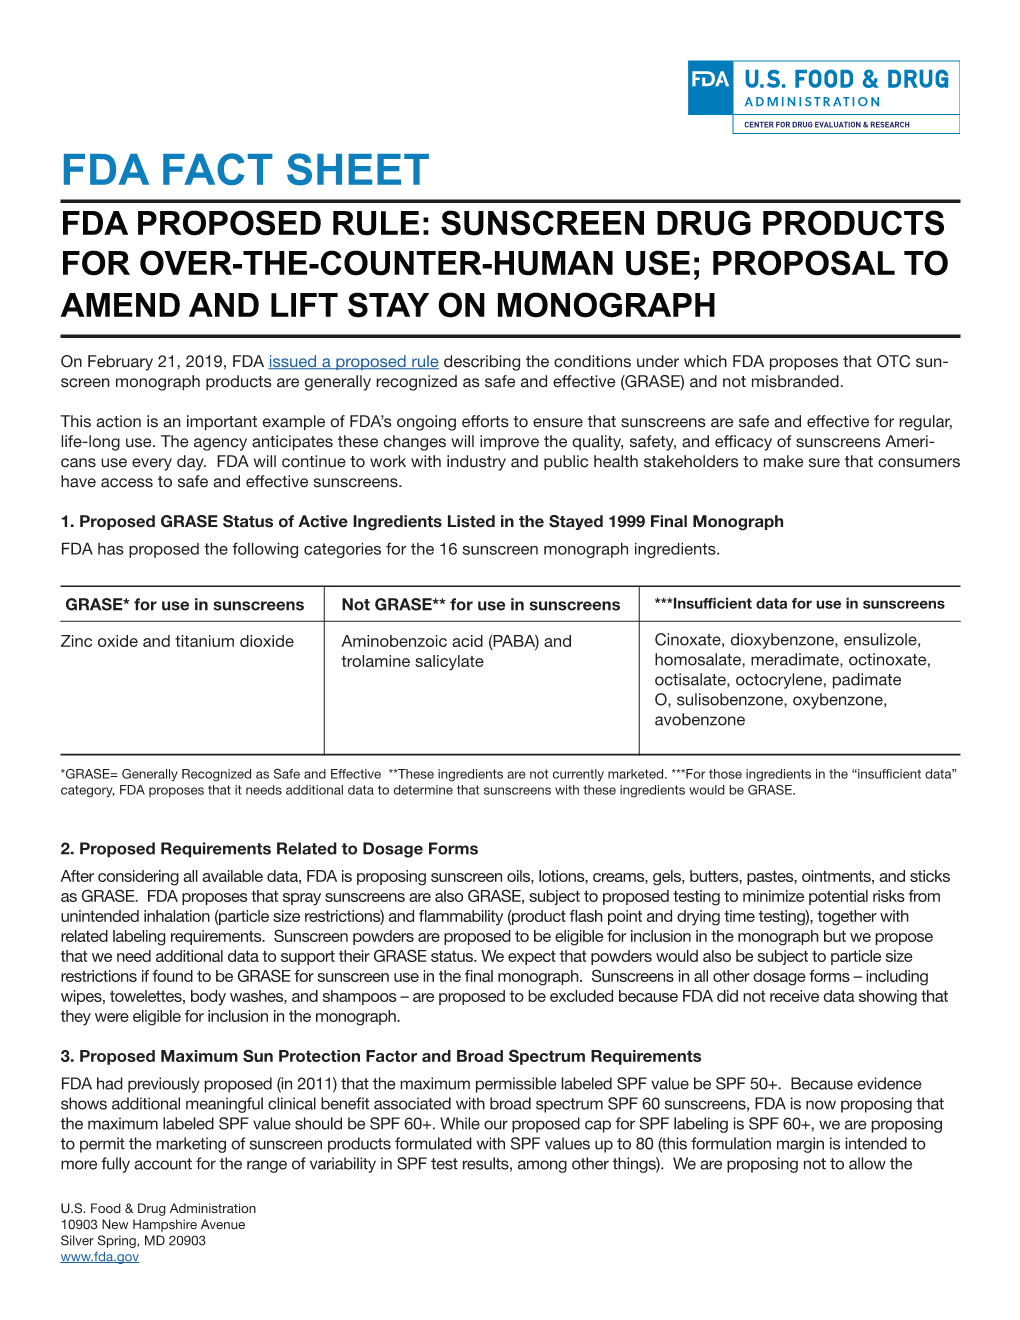 Fda Fact Sheet Fda Proposed Rule: Sunscreen Drug Products for Over-The-Counter-Human Use; Proposal to Amend and Lift Stay on Monograph